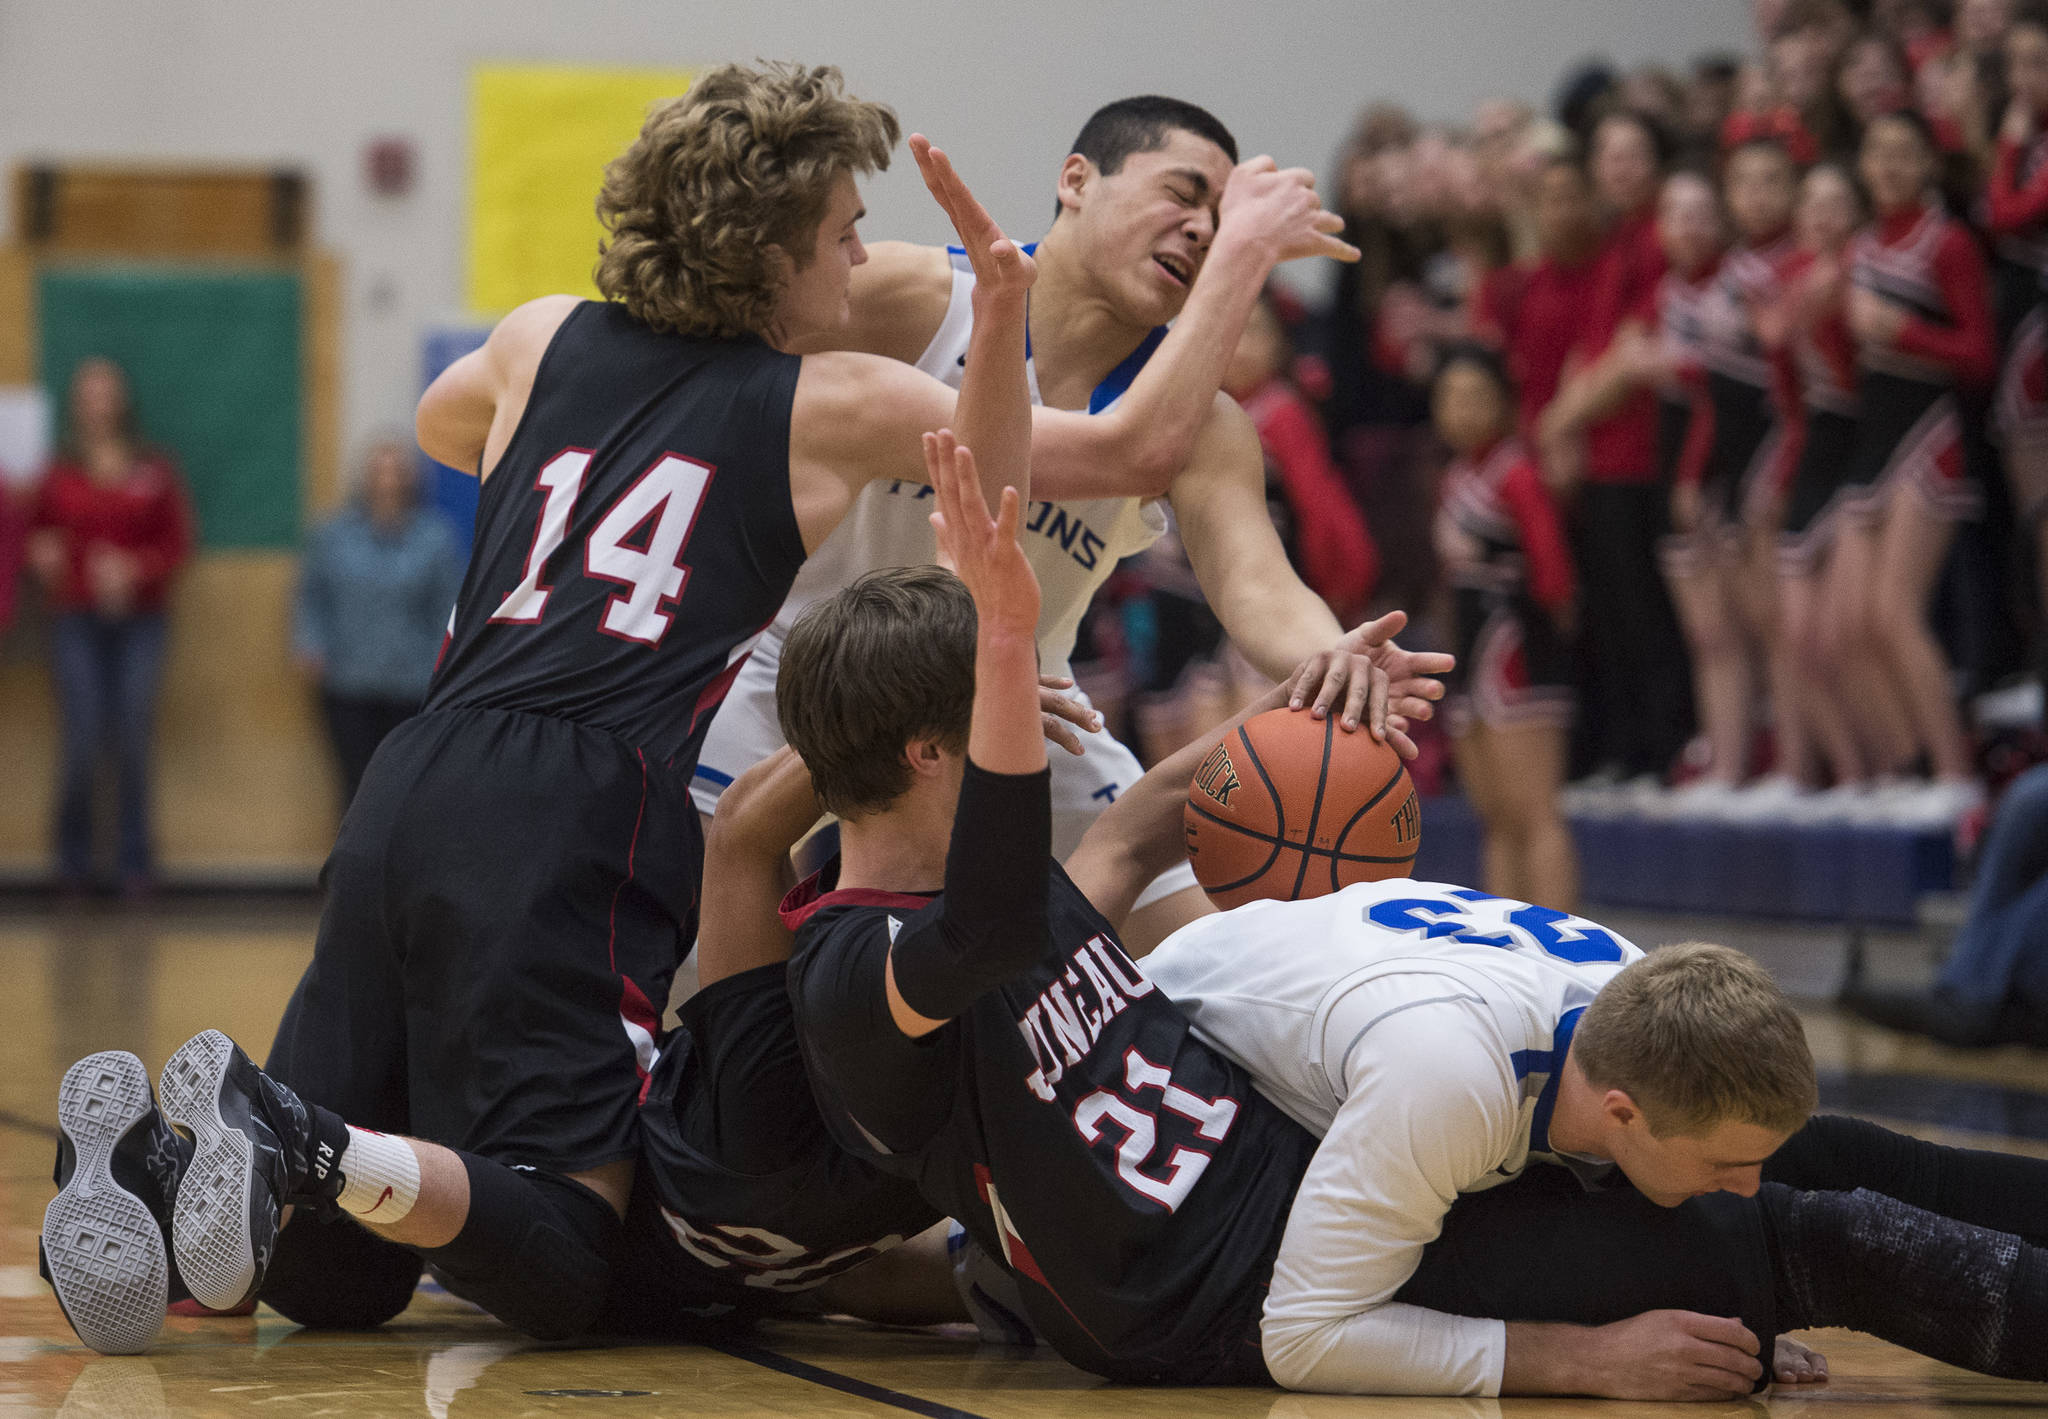 Juneau-Douglas’s Kasey Watts, Ulyx Bohulano and Bryce Swofford pile up with Thunder Mountain’s Roy Tupou and Riley Olson during a loose ball at TMHS on Friday, March 3, 2017. JDHS won 46-40. (Michael Penn | Juneau Empire)